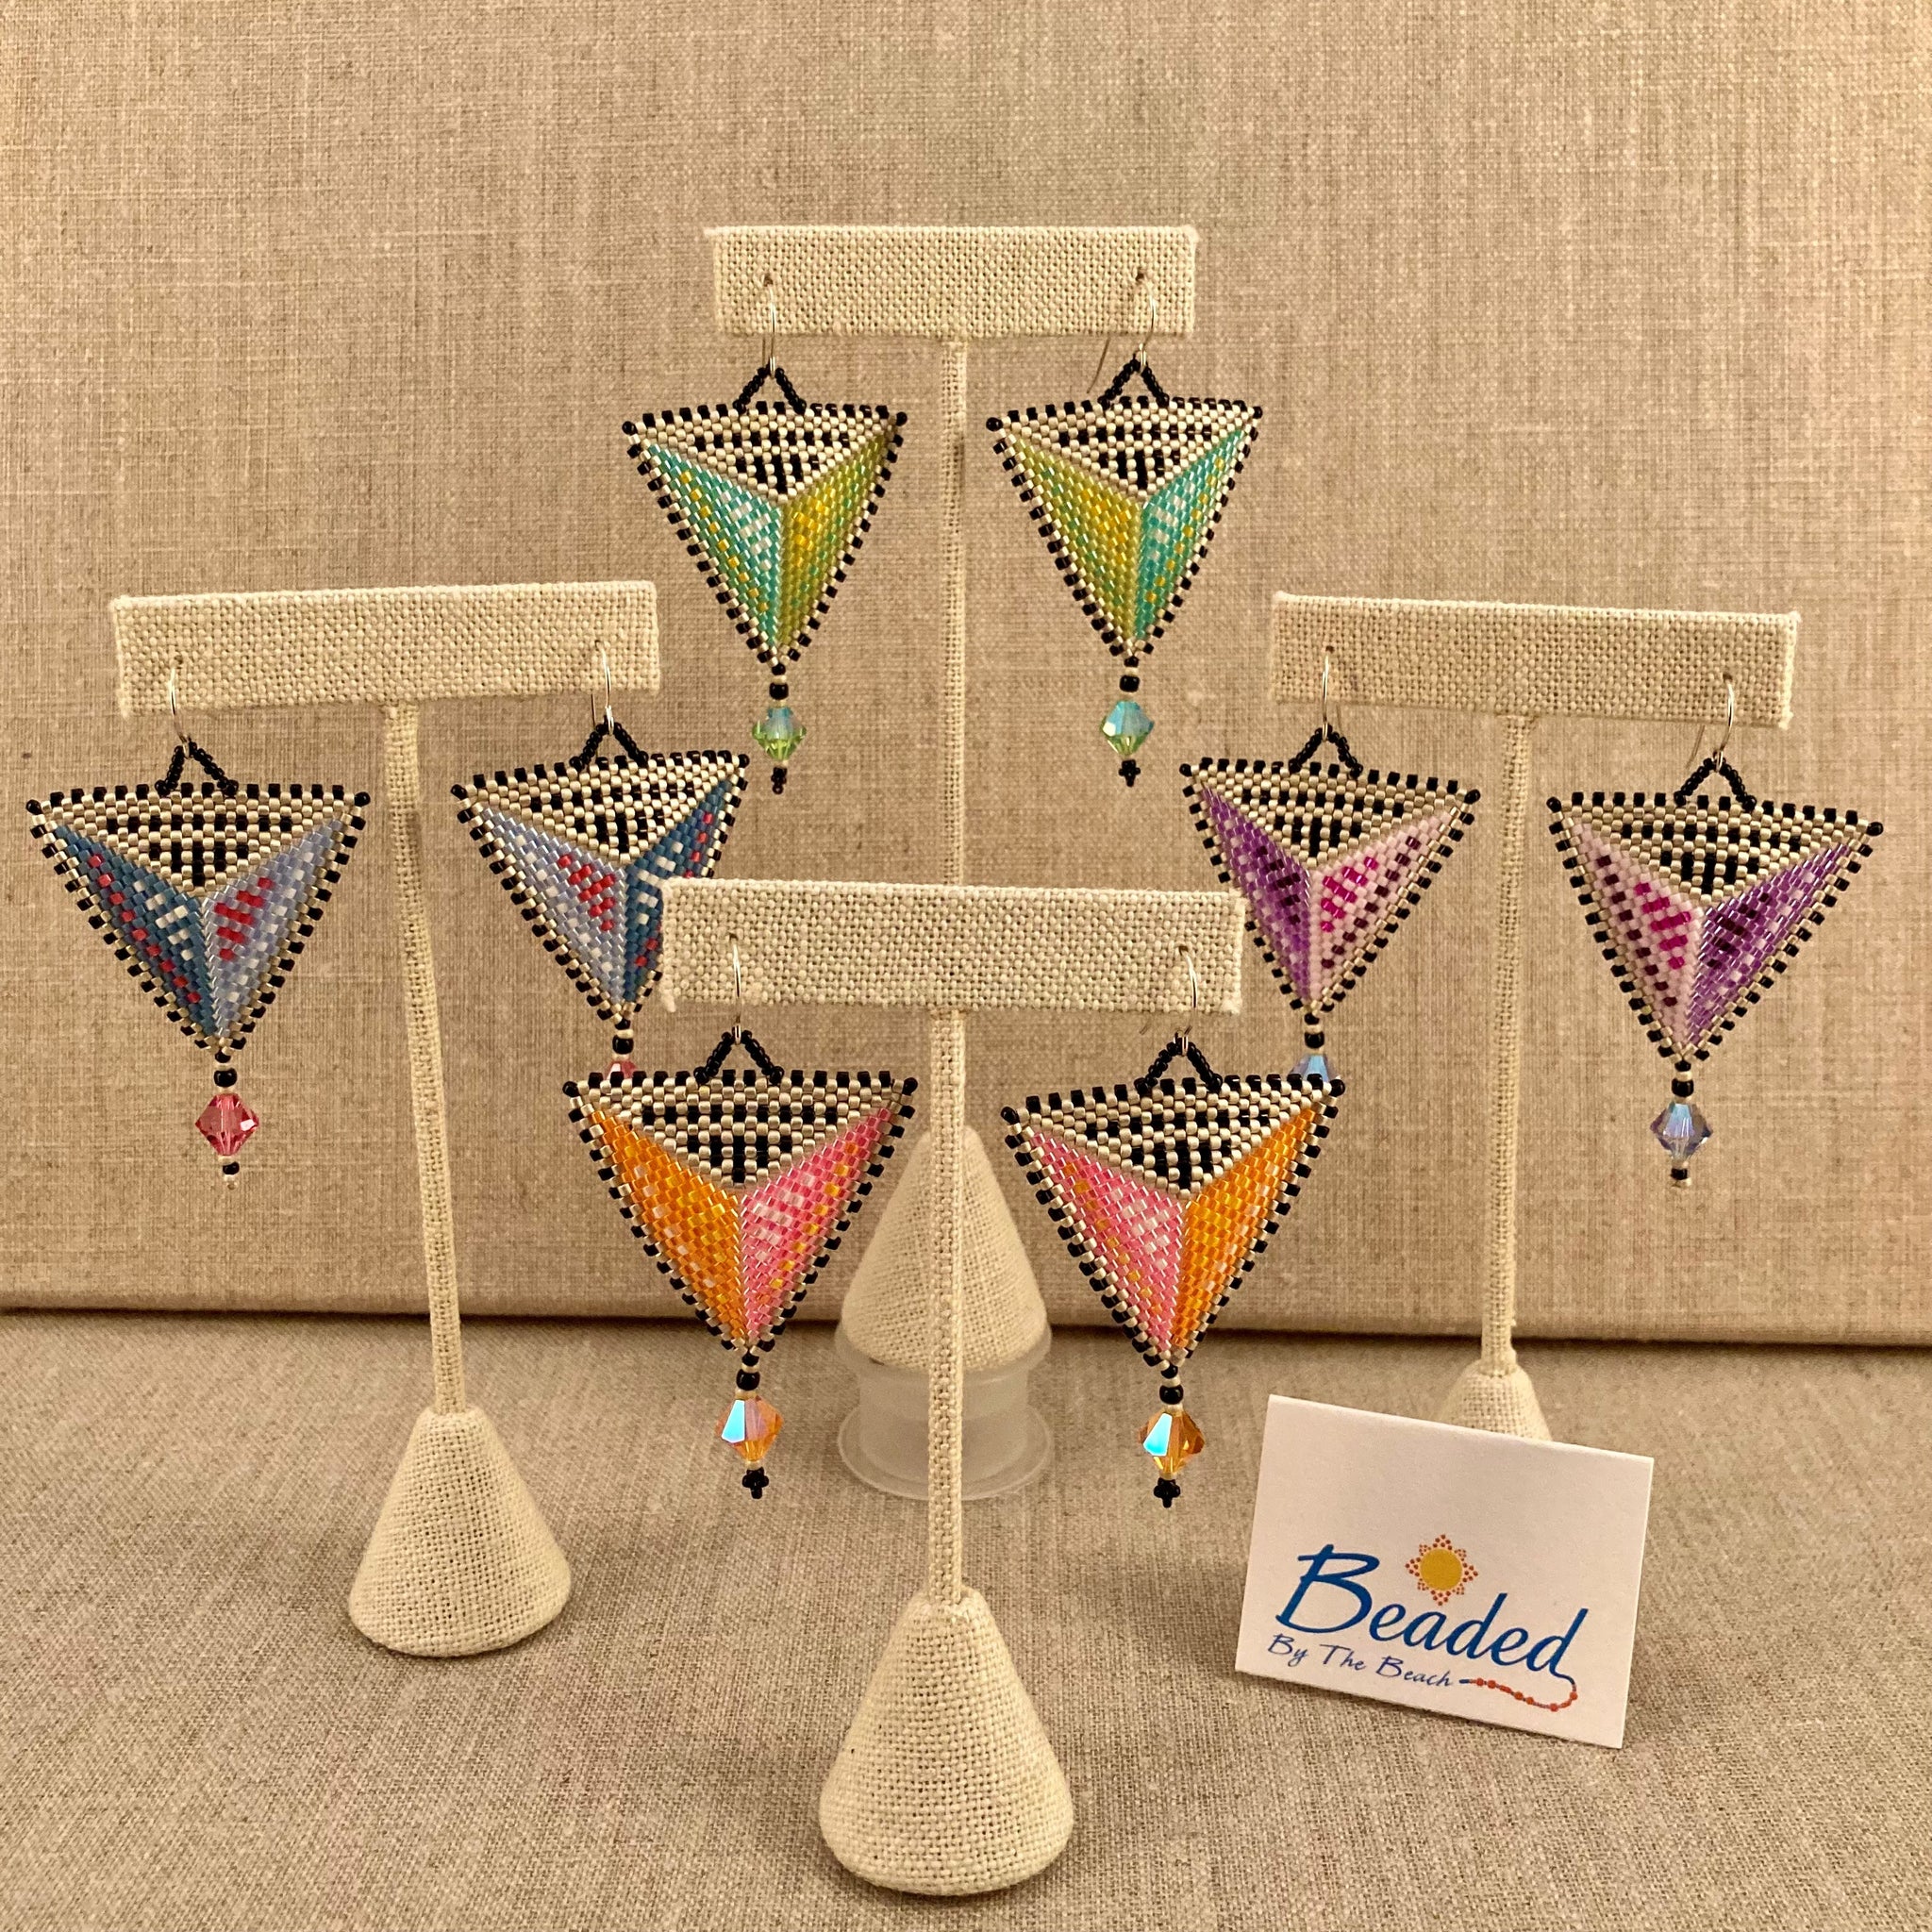 Modern Couture Handmade Beaded By The Beach Geometric Triangle Earrings in 4 four vibrant colors with matching large Genuine Swarovski Crystals Stunning 